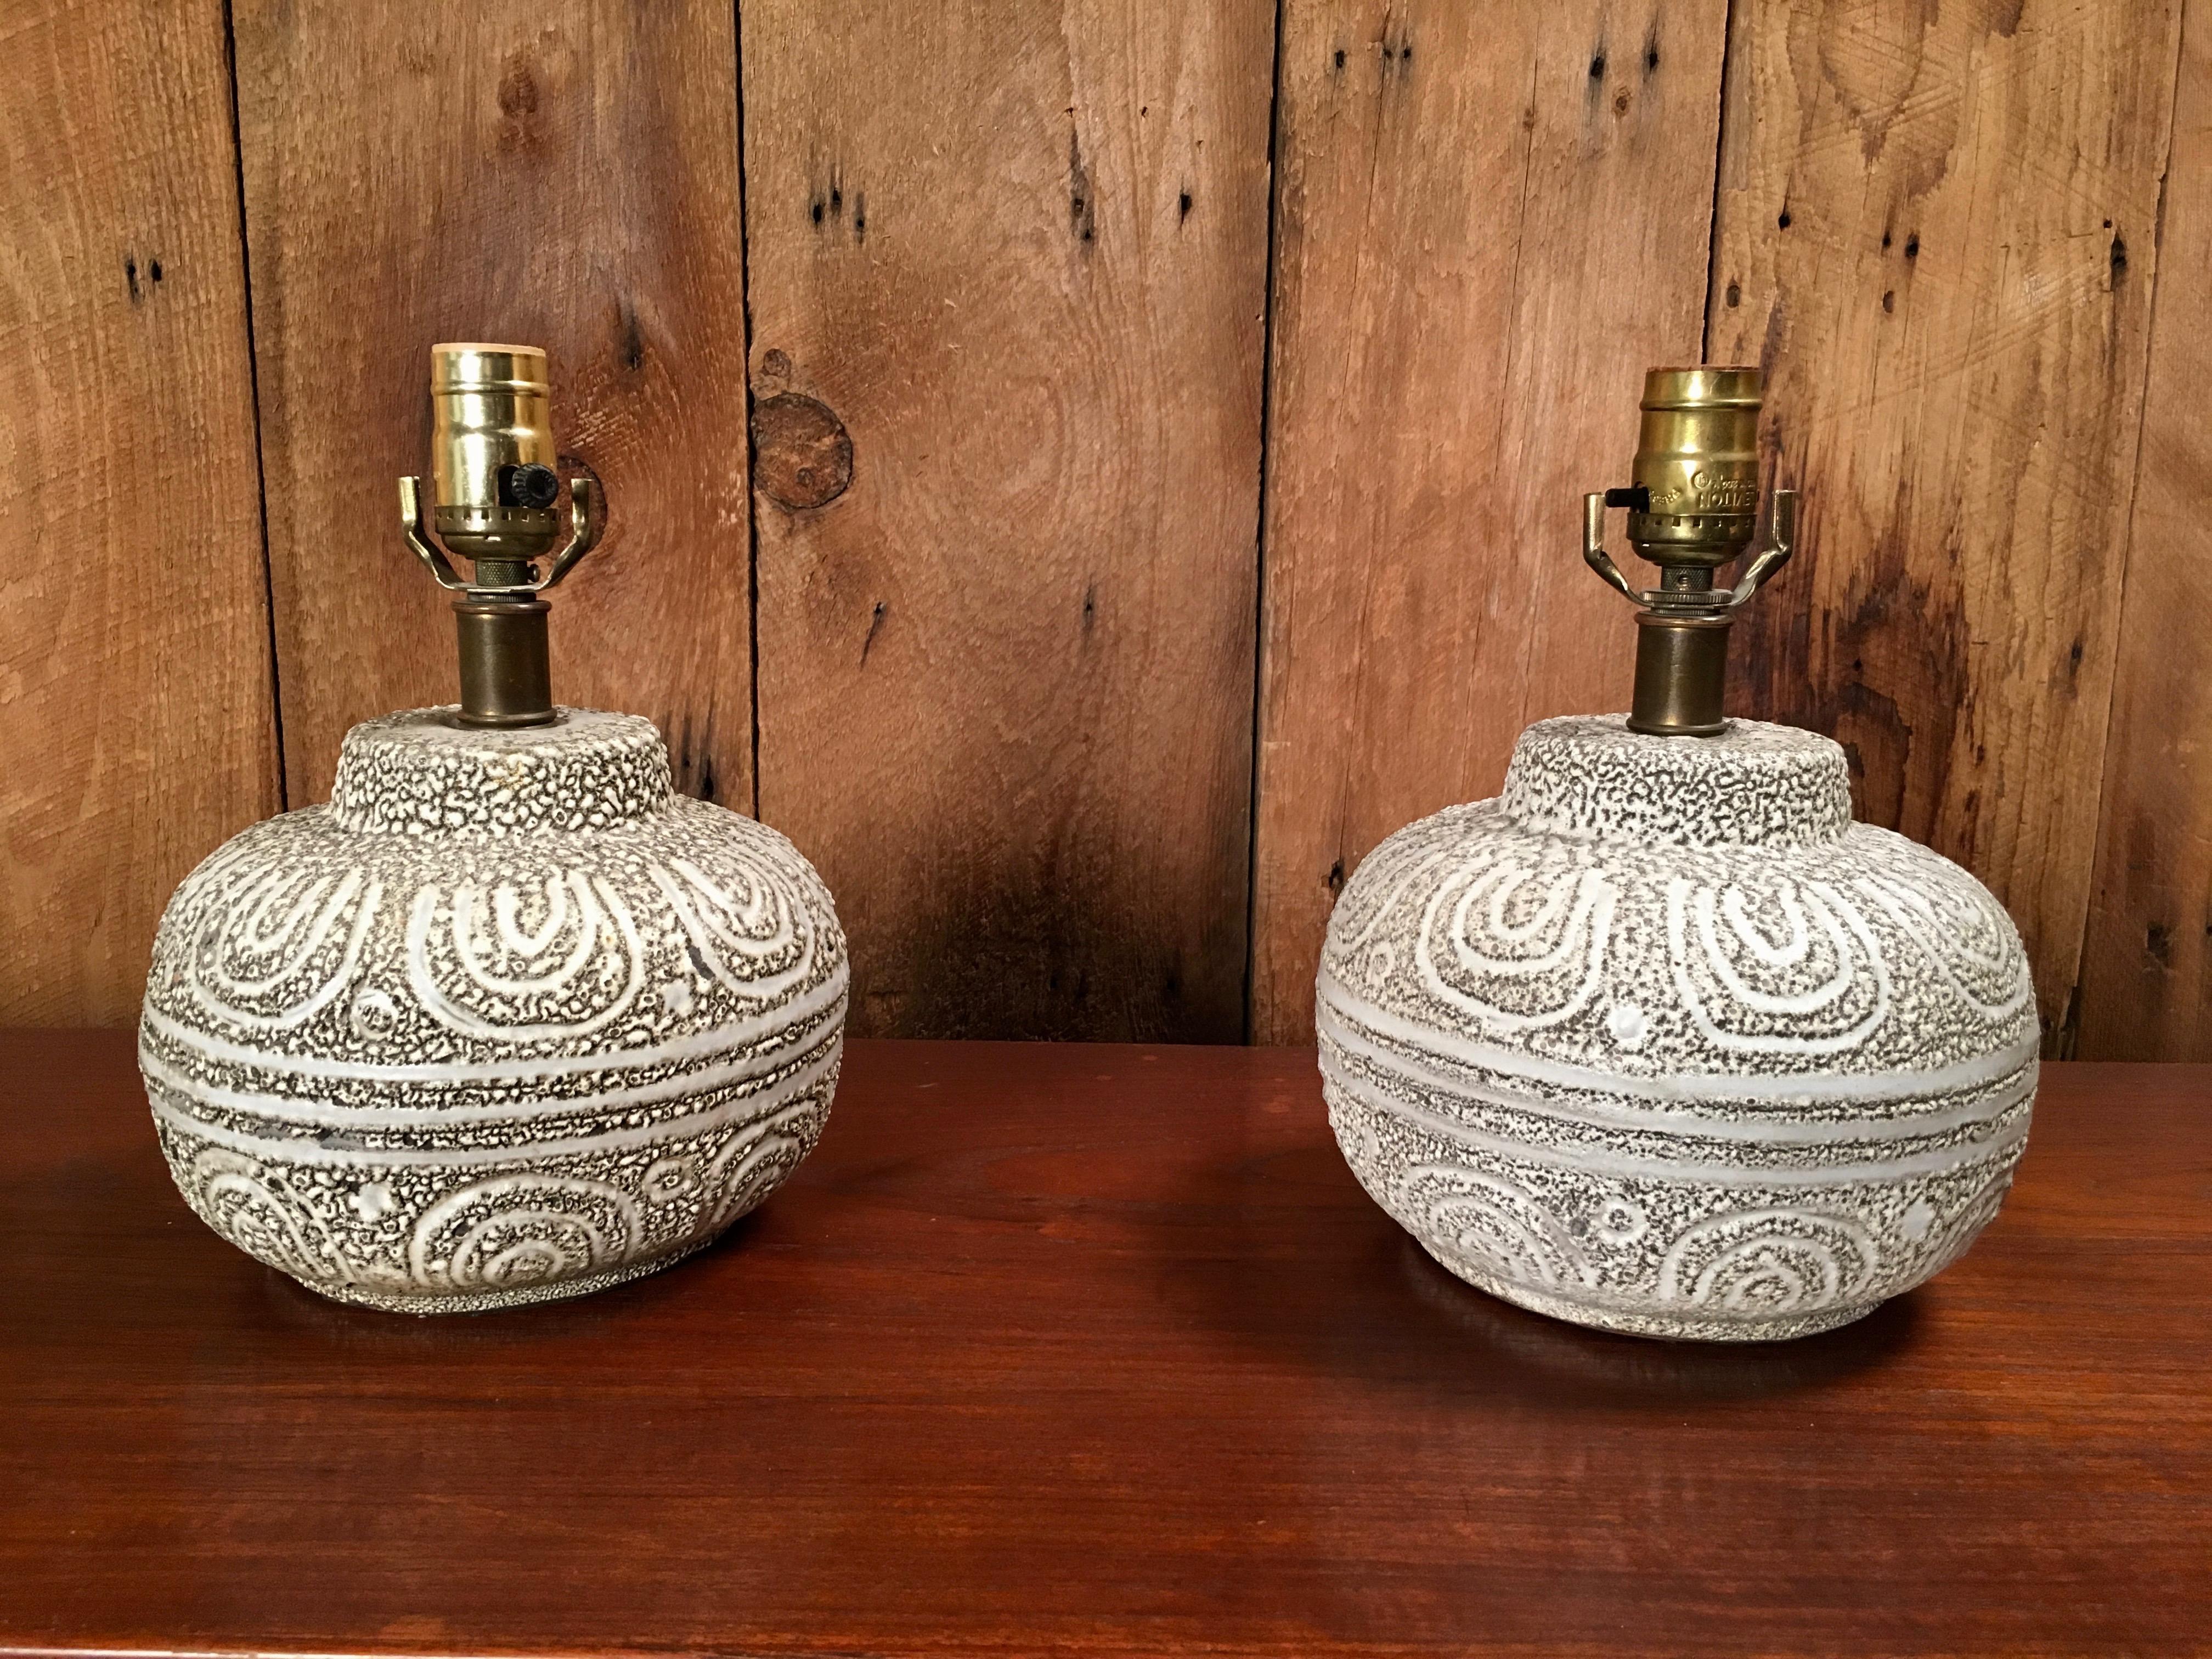 Pair of Danish sculpted glazed pottery lamps in grey and oatmeal color (Shades not included).